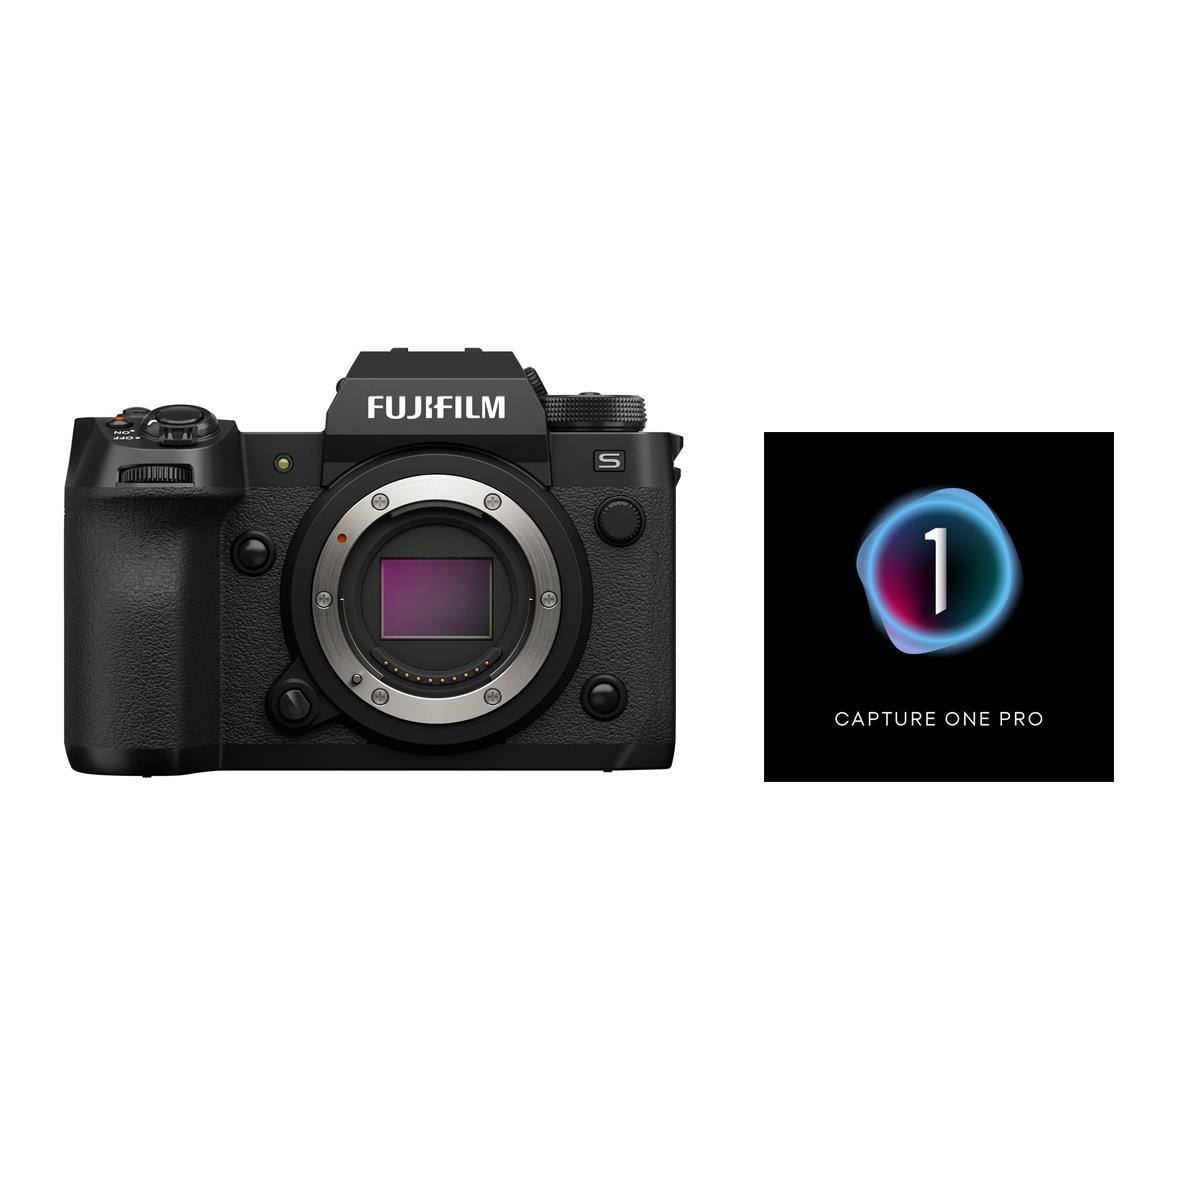 Image of Fujifilm X-H2S Mirrorless Digital Camera Body with Capture One Pro